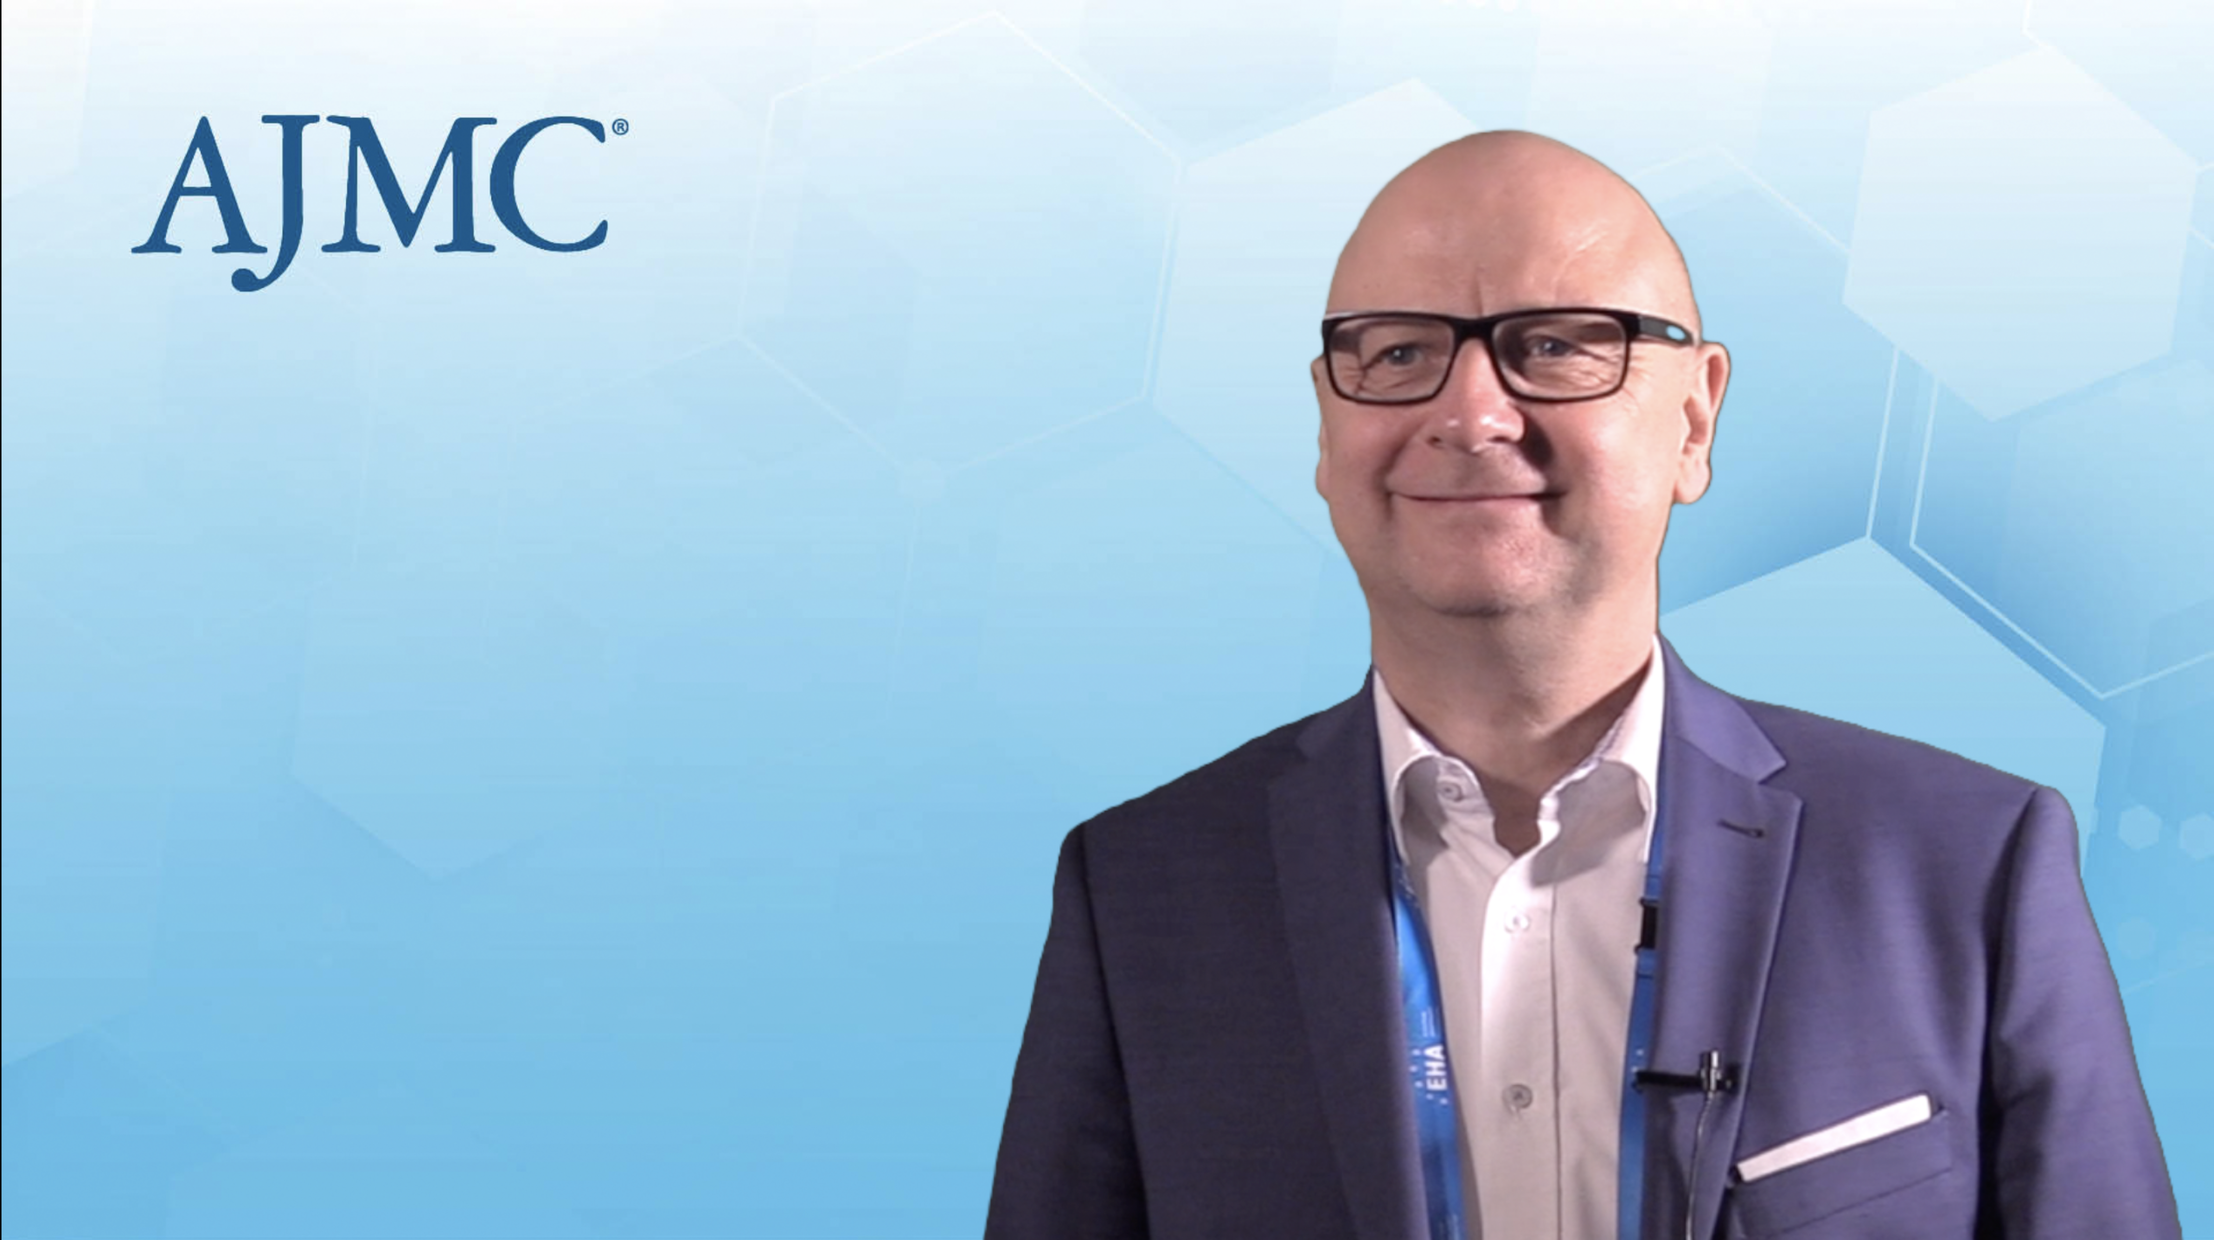 Martin Griesshammer, MD, PhD, professor and medical director of the Department of Haematology, Haemostaseology, Oncology, and Palliative Care at the Johannes Wesling University Clinic